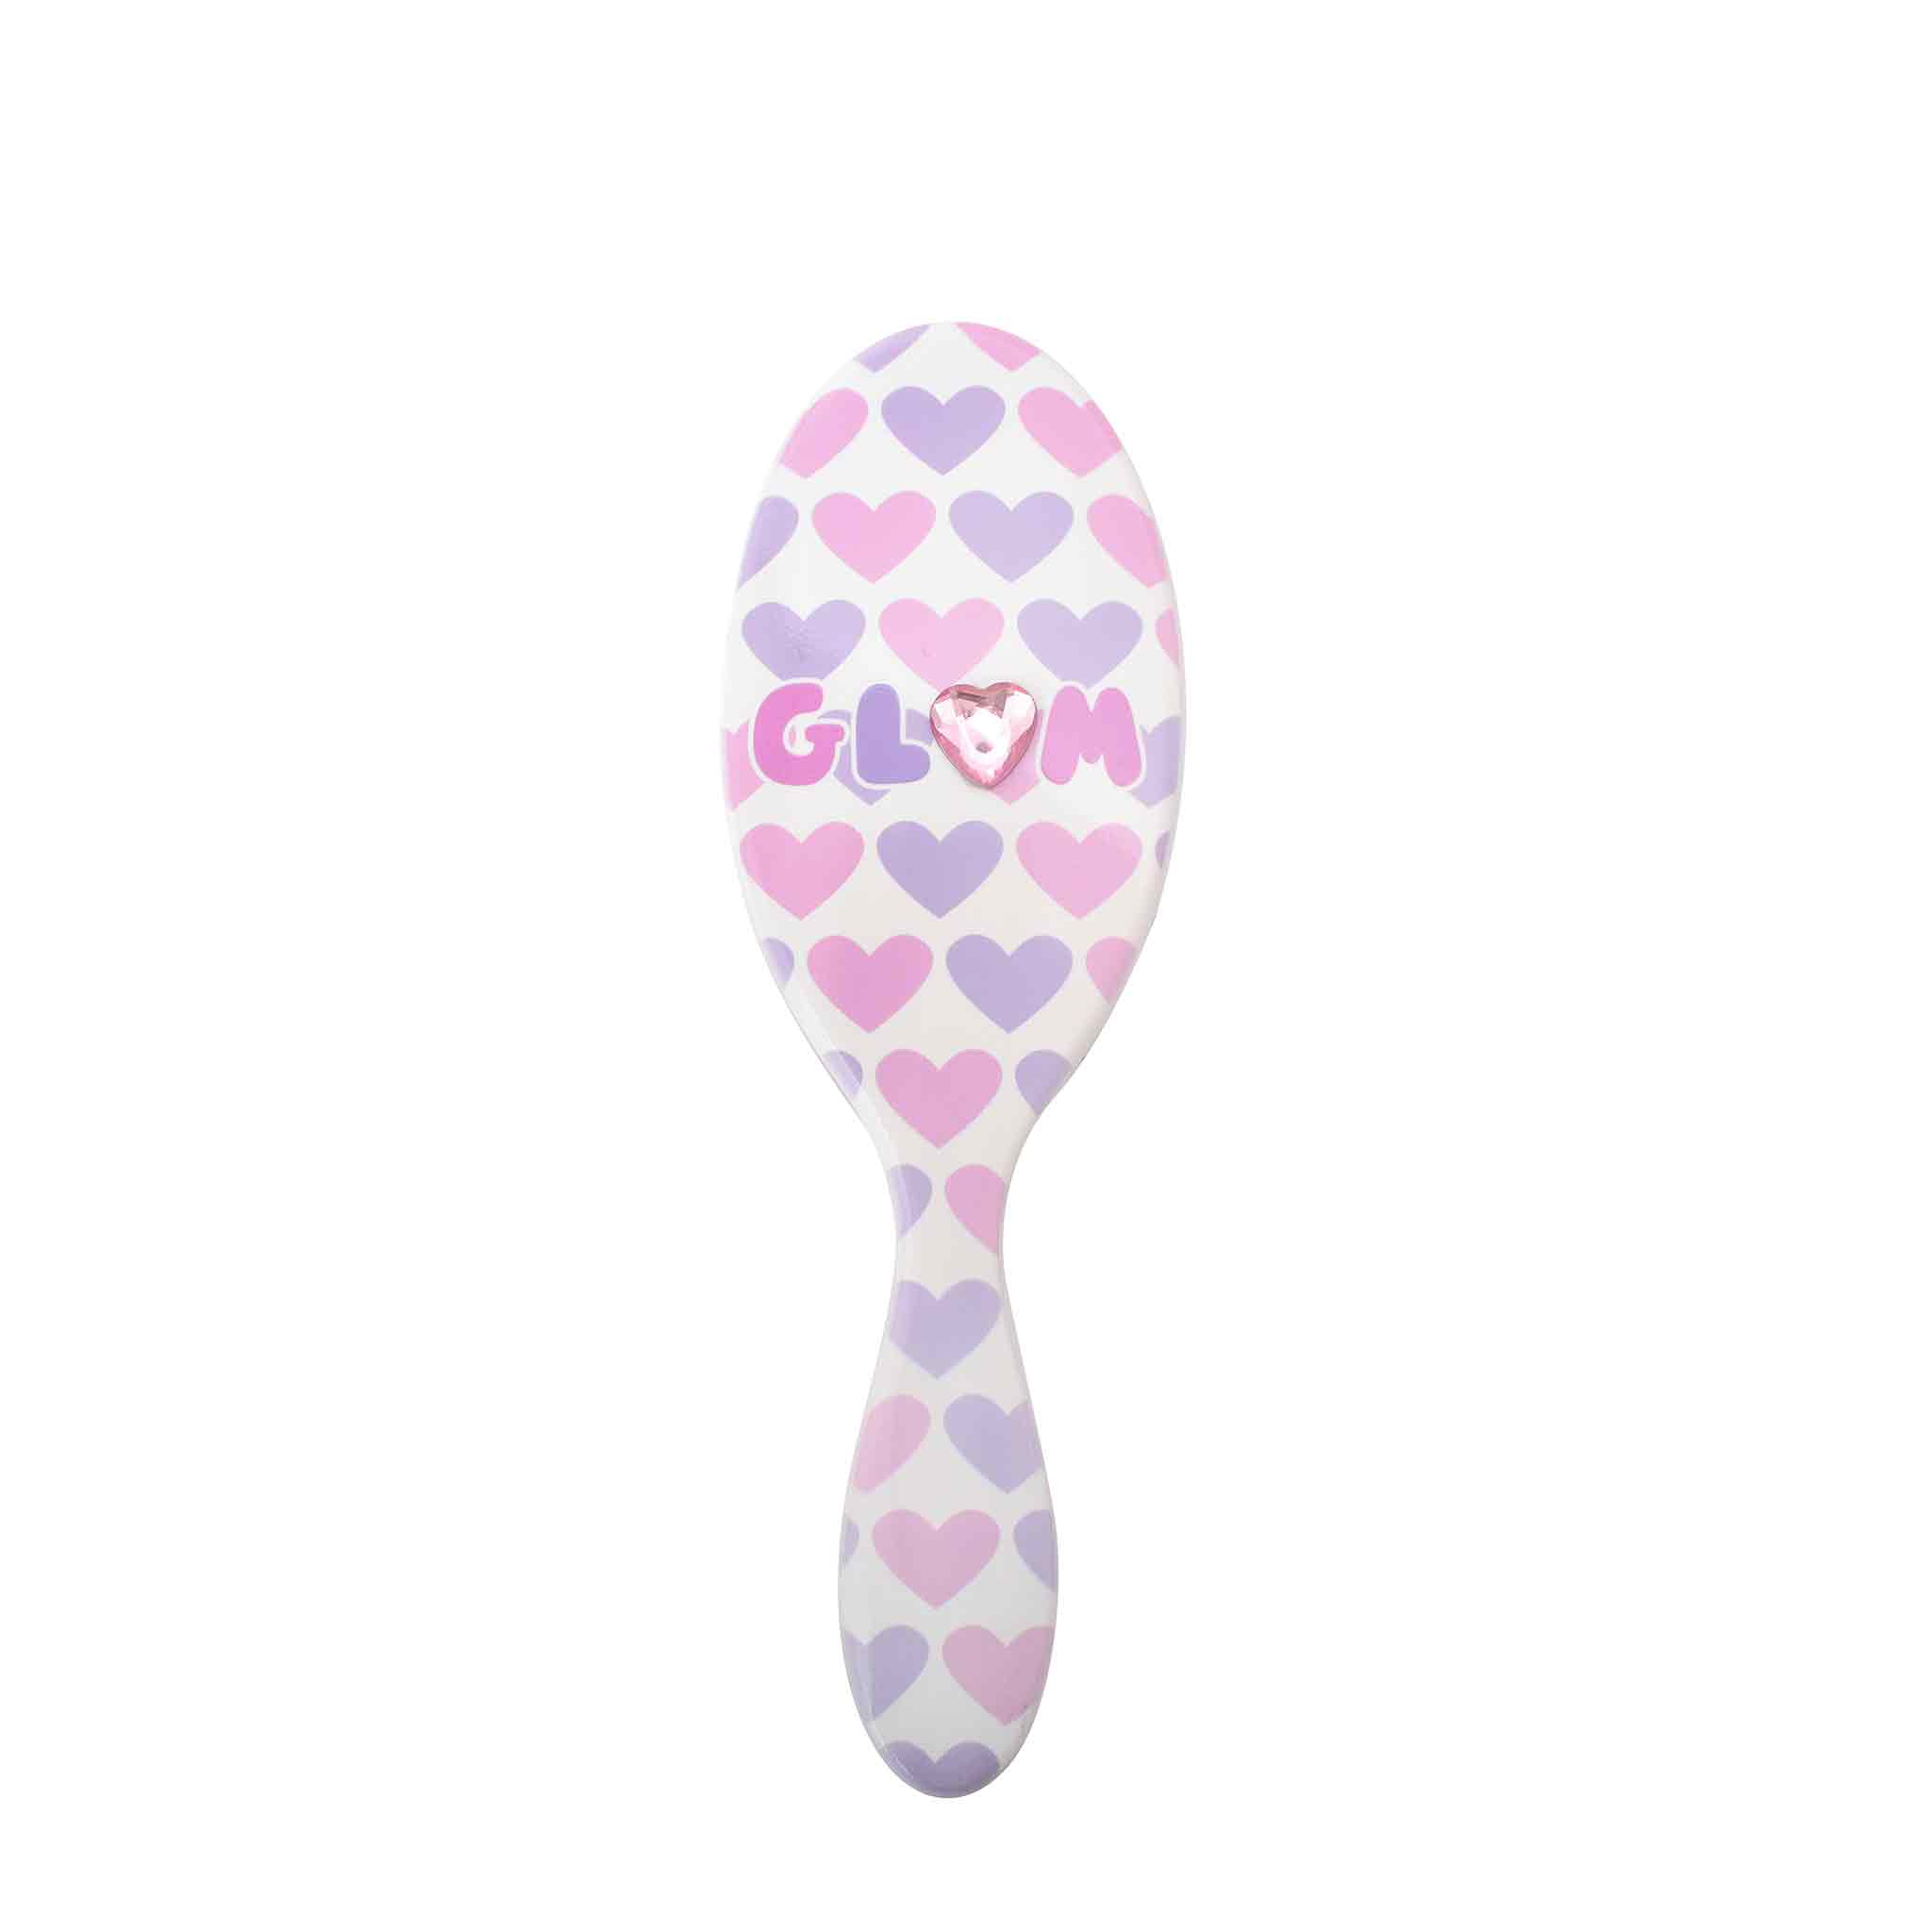 Front view of 'Glam' heart-printed round hairbrush